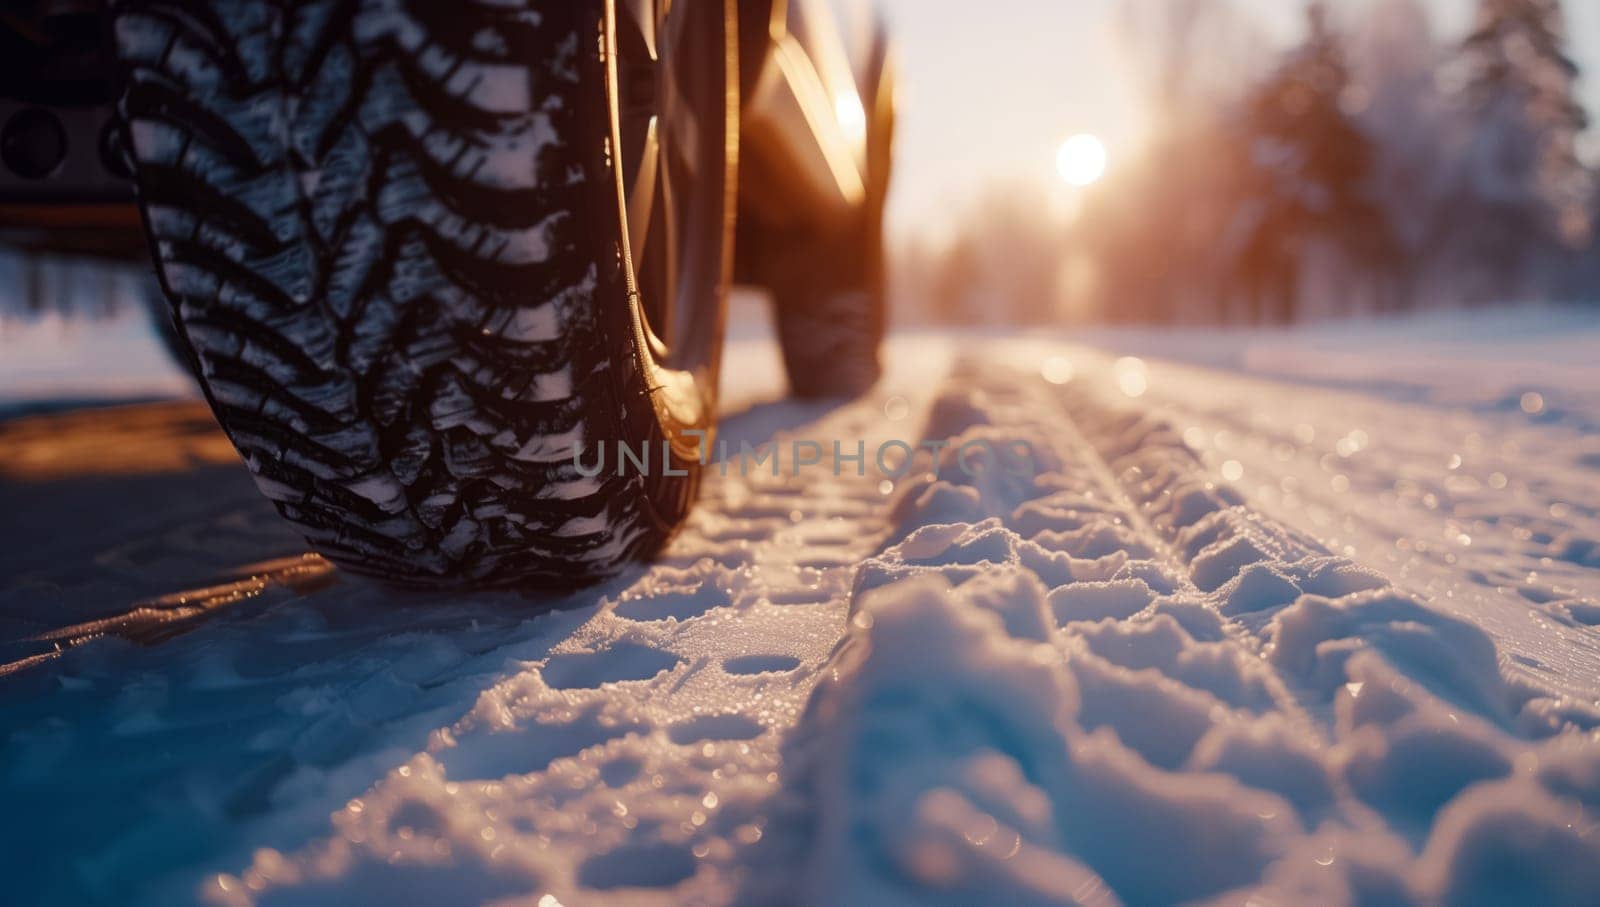 Automotive tires grip freezing asphalt as car drives on snowy road at sunset by richwolf